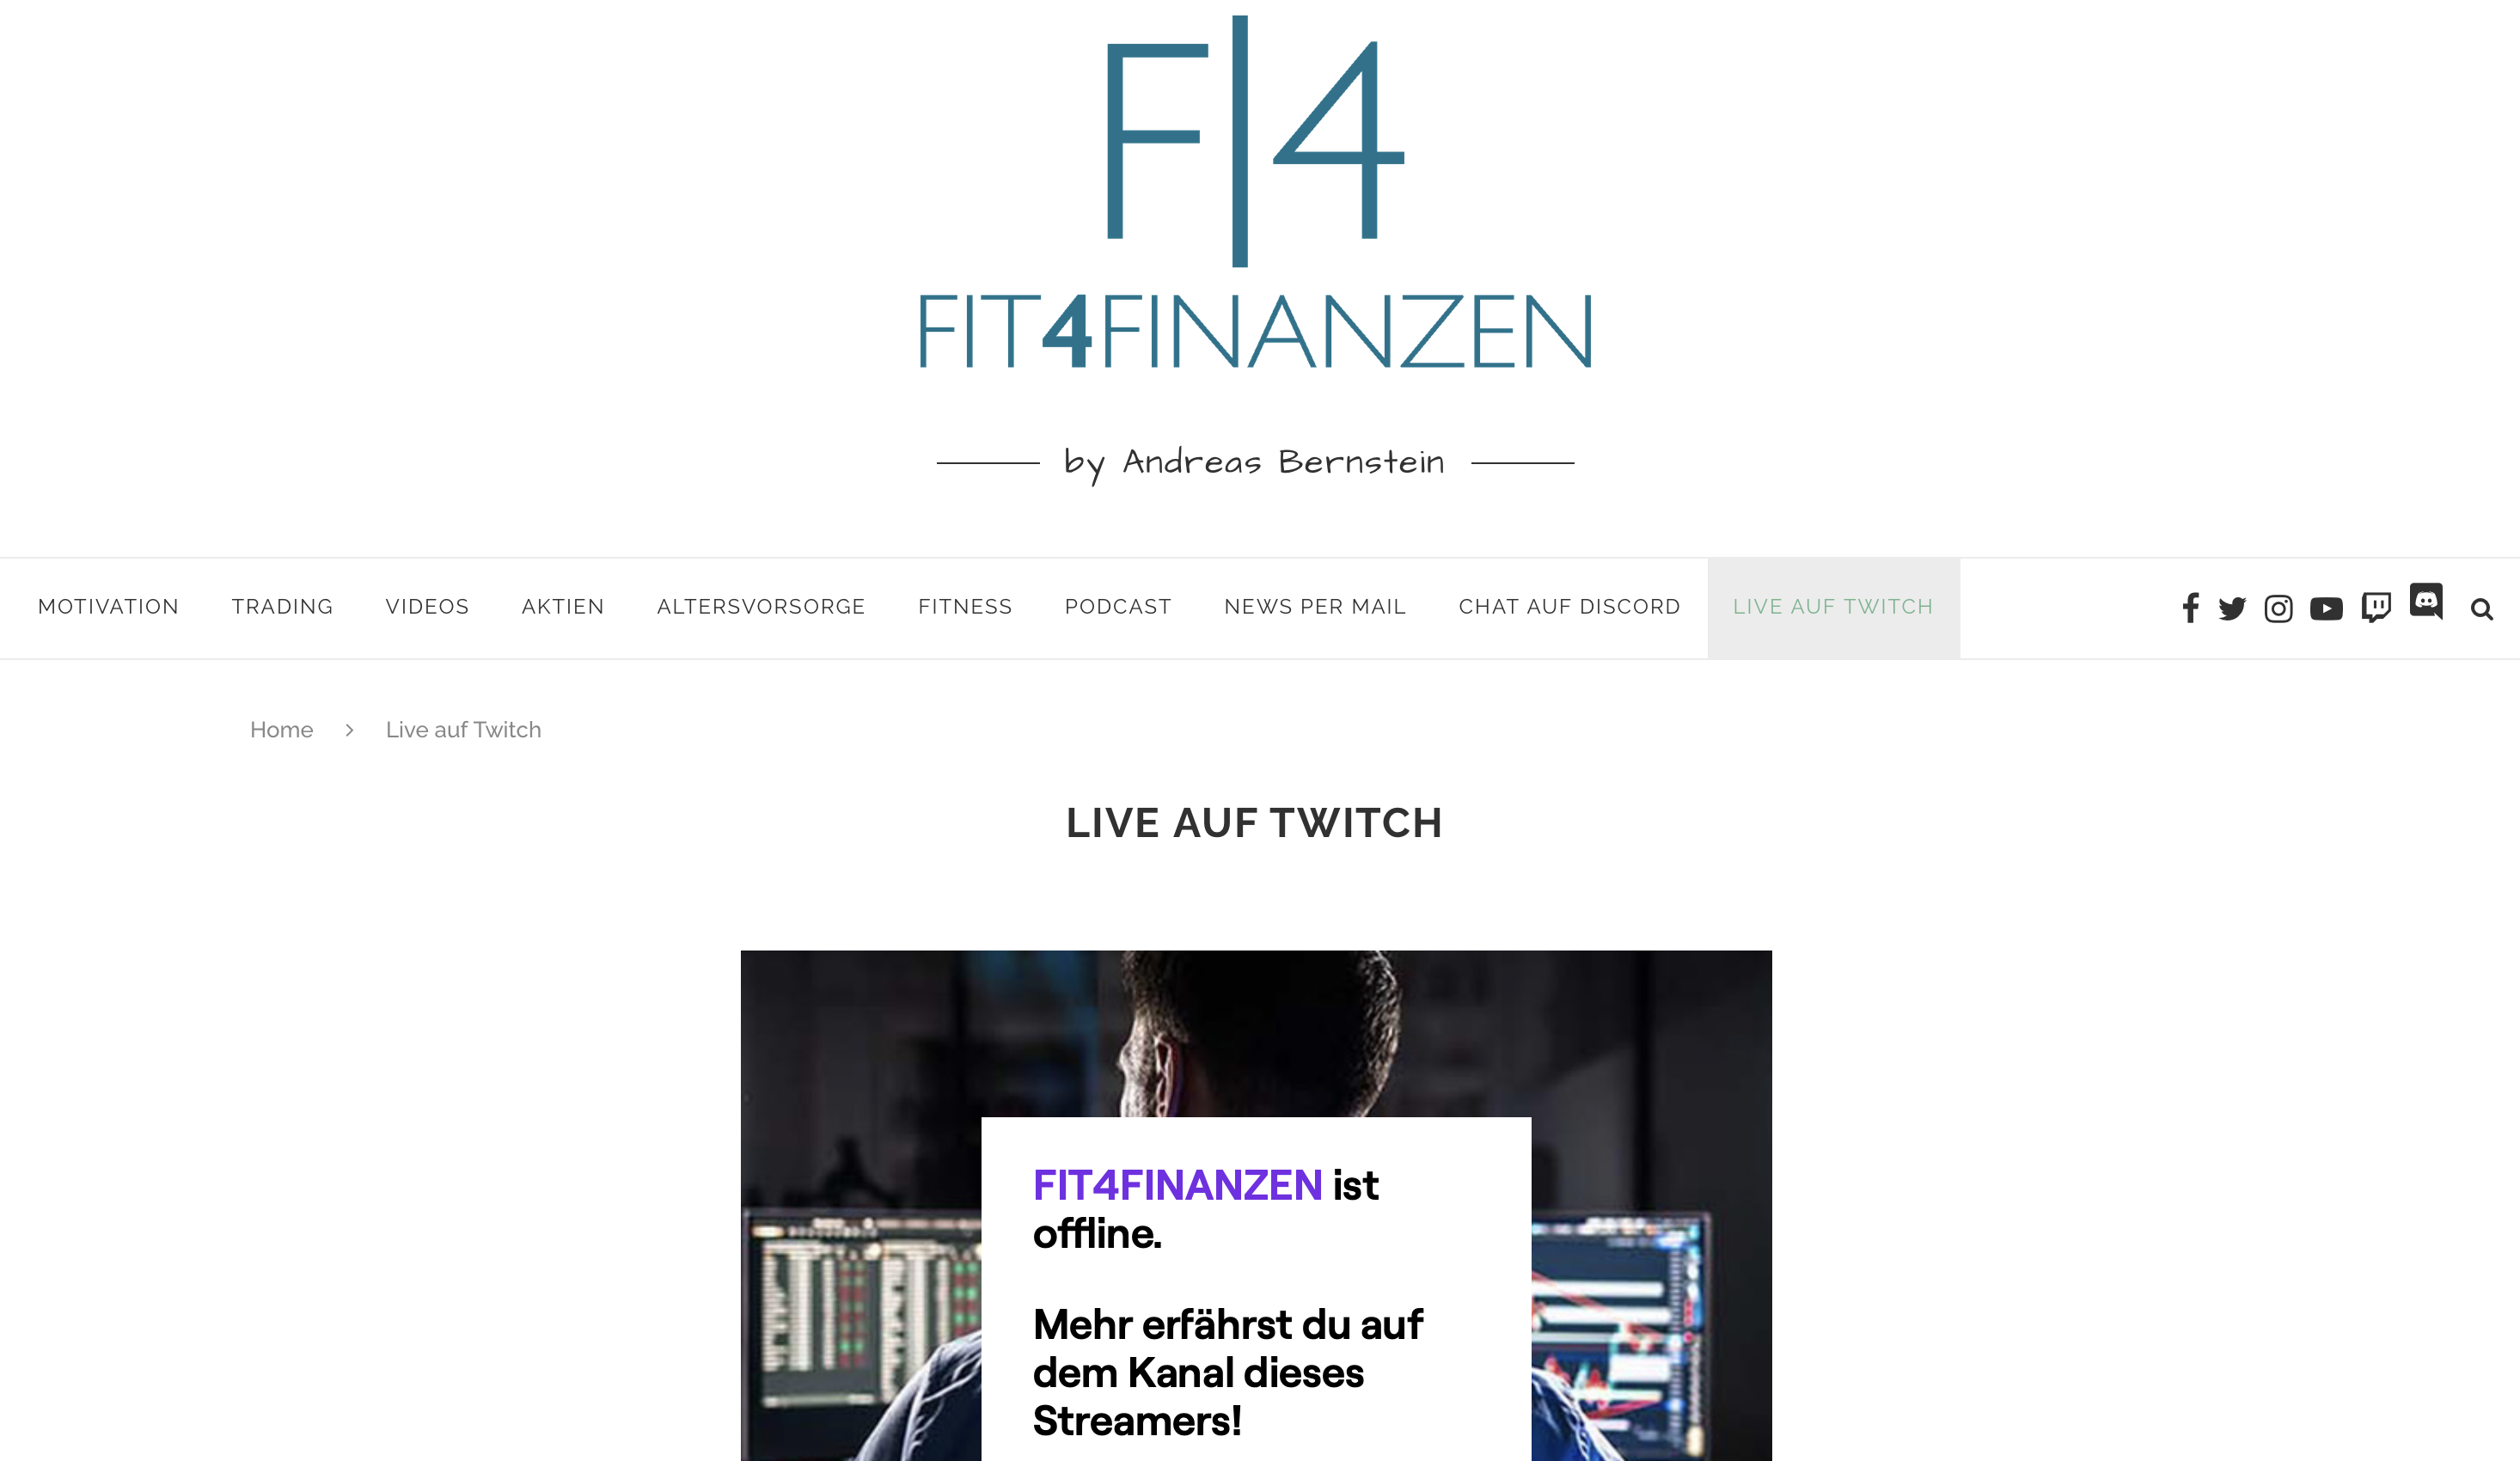 FIT4FINANZEN Twitch on the home page